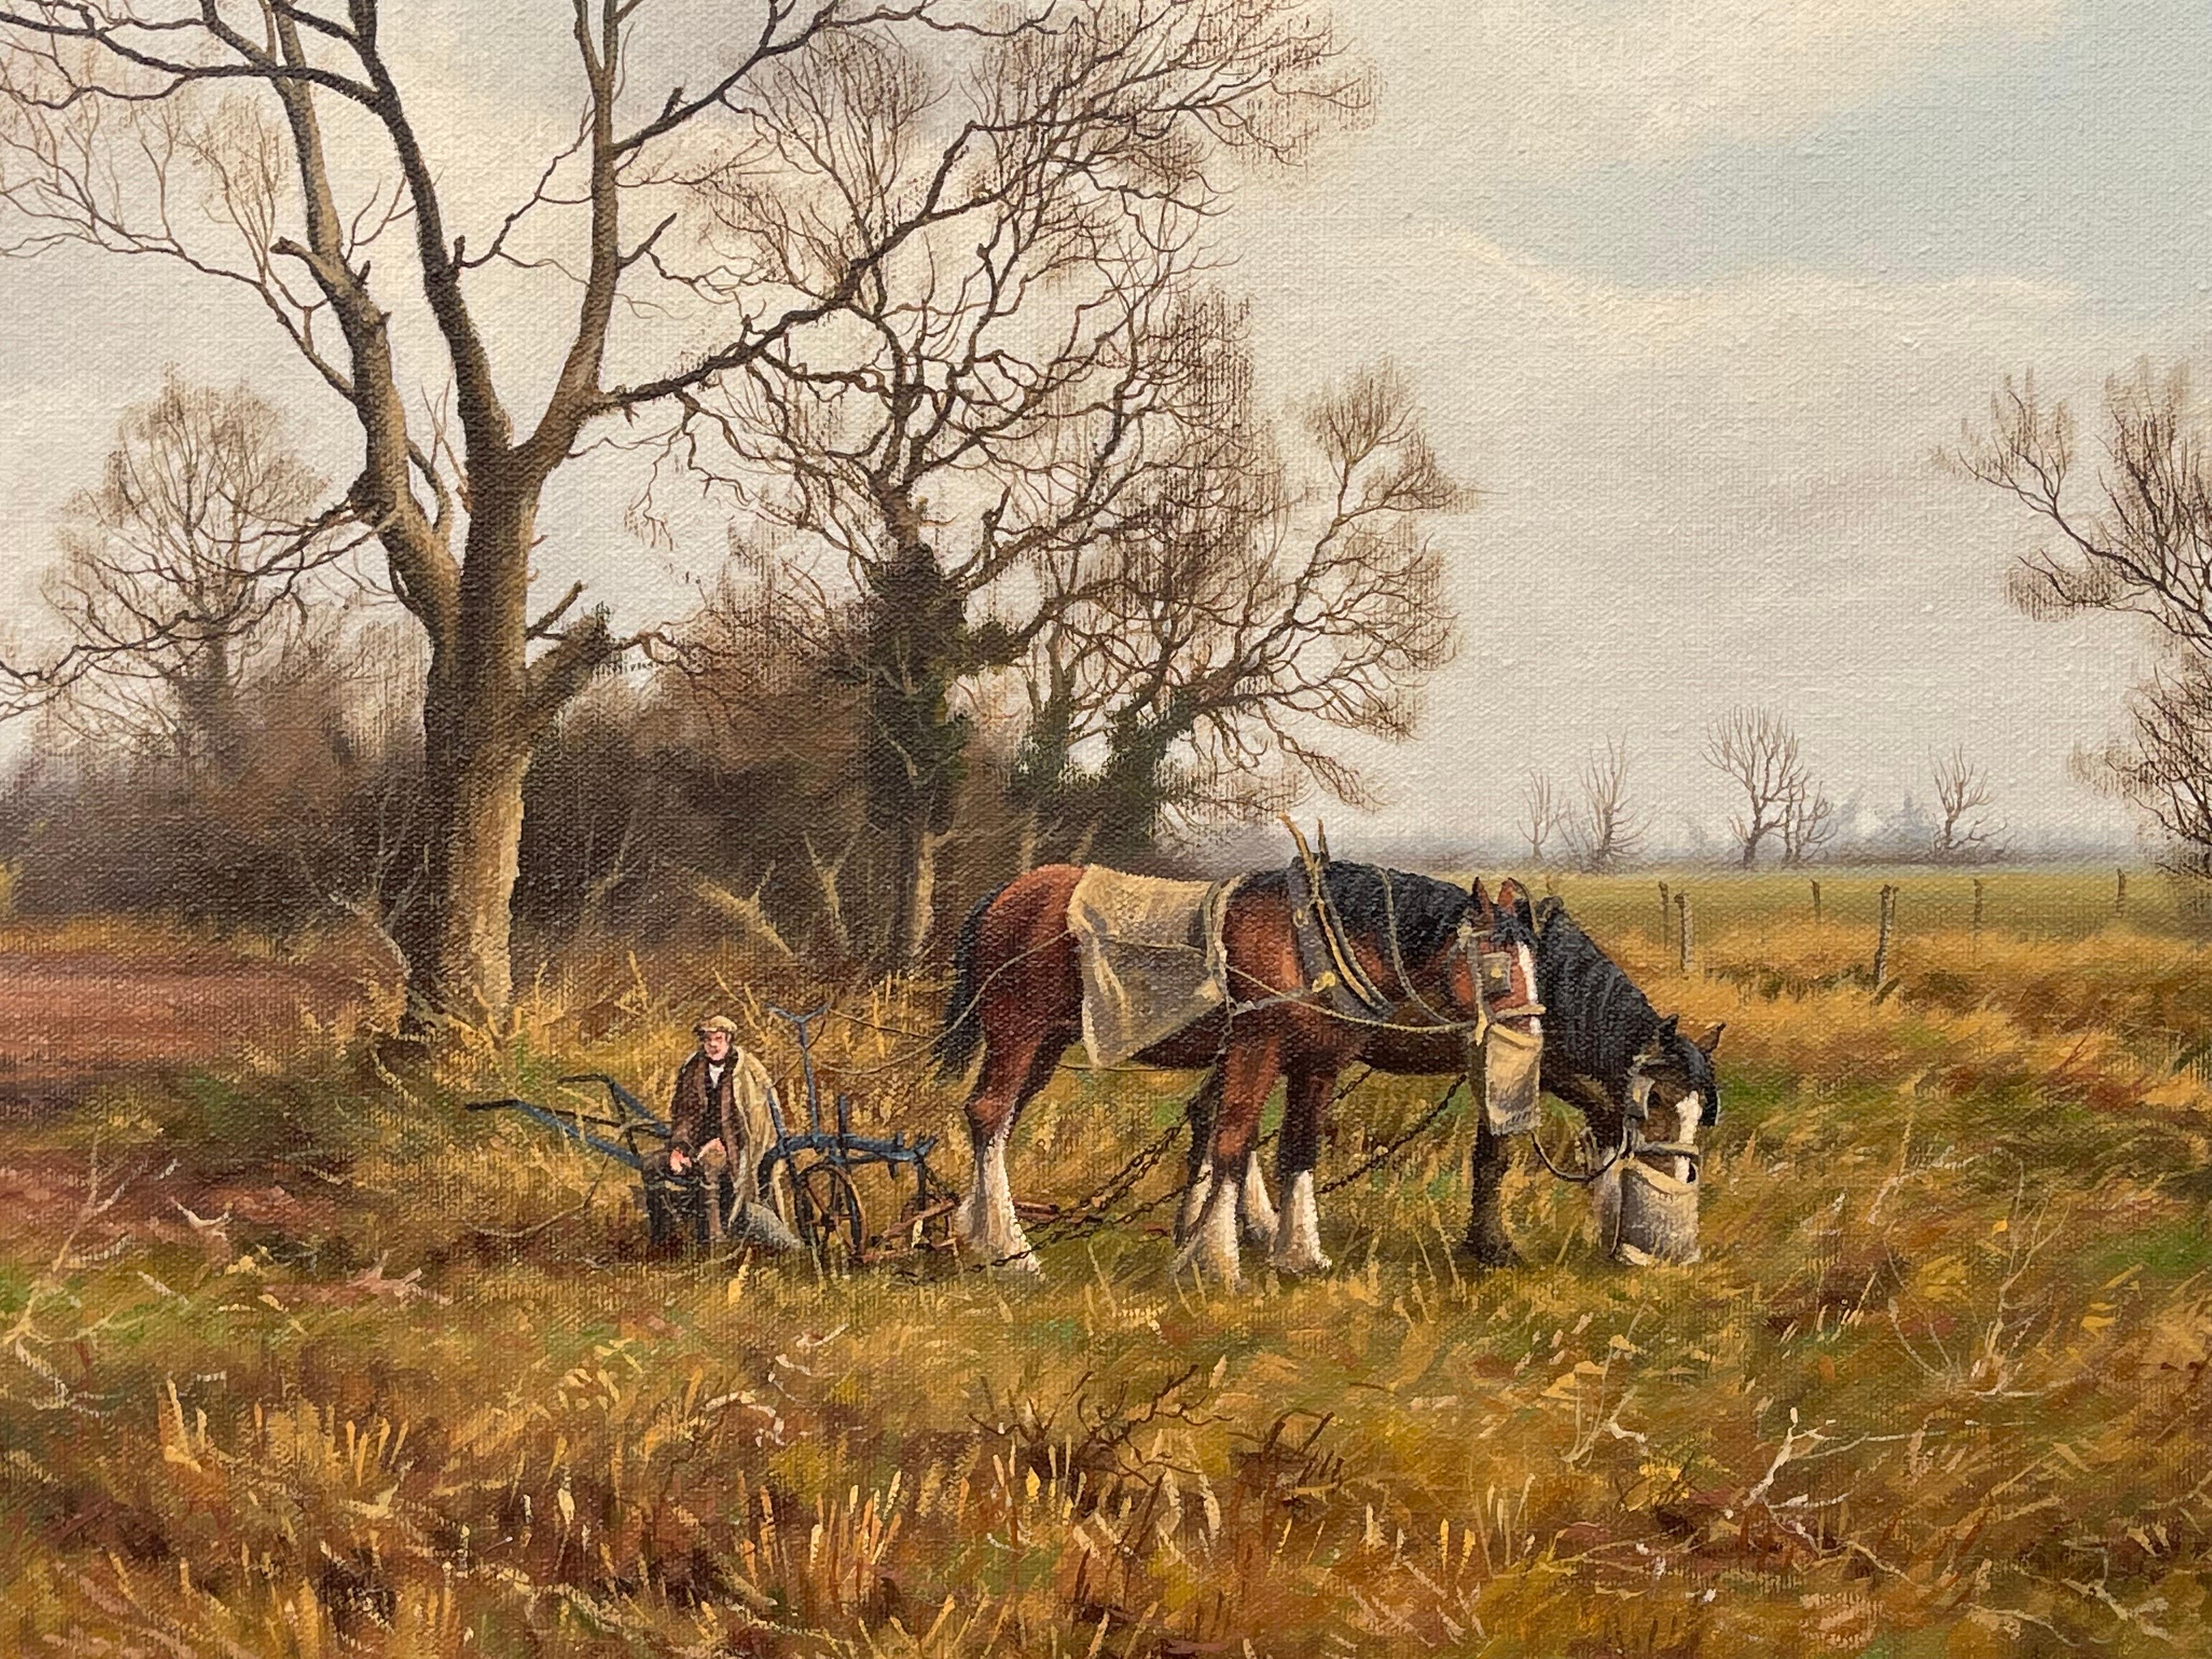 Painting of English Countryside with Horses & Plough by Modern British Artist For Sale 5